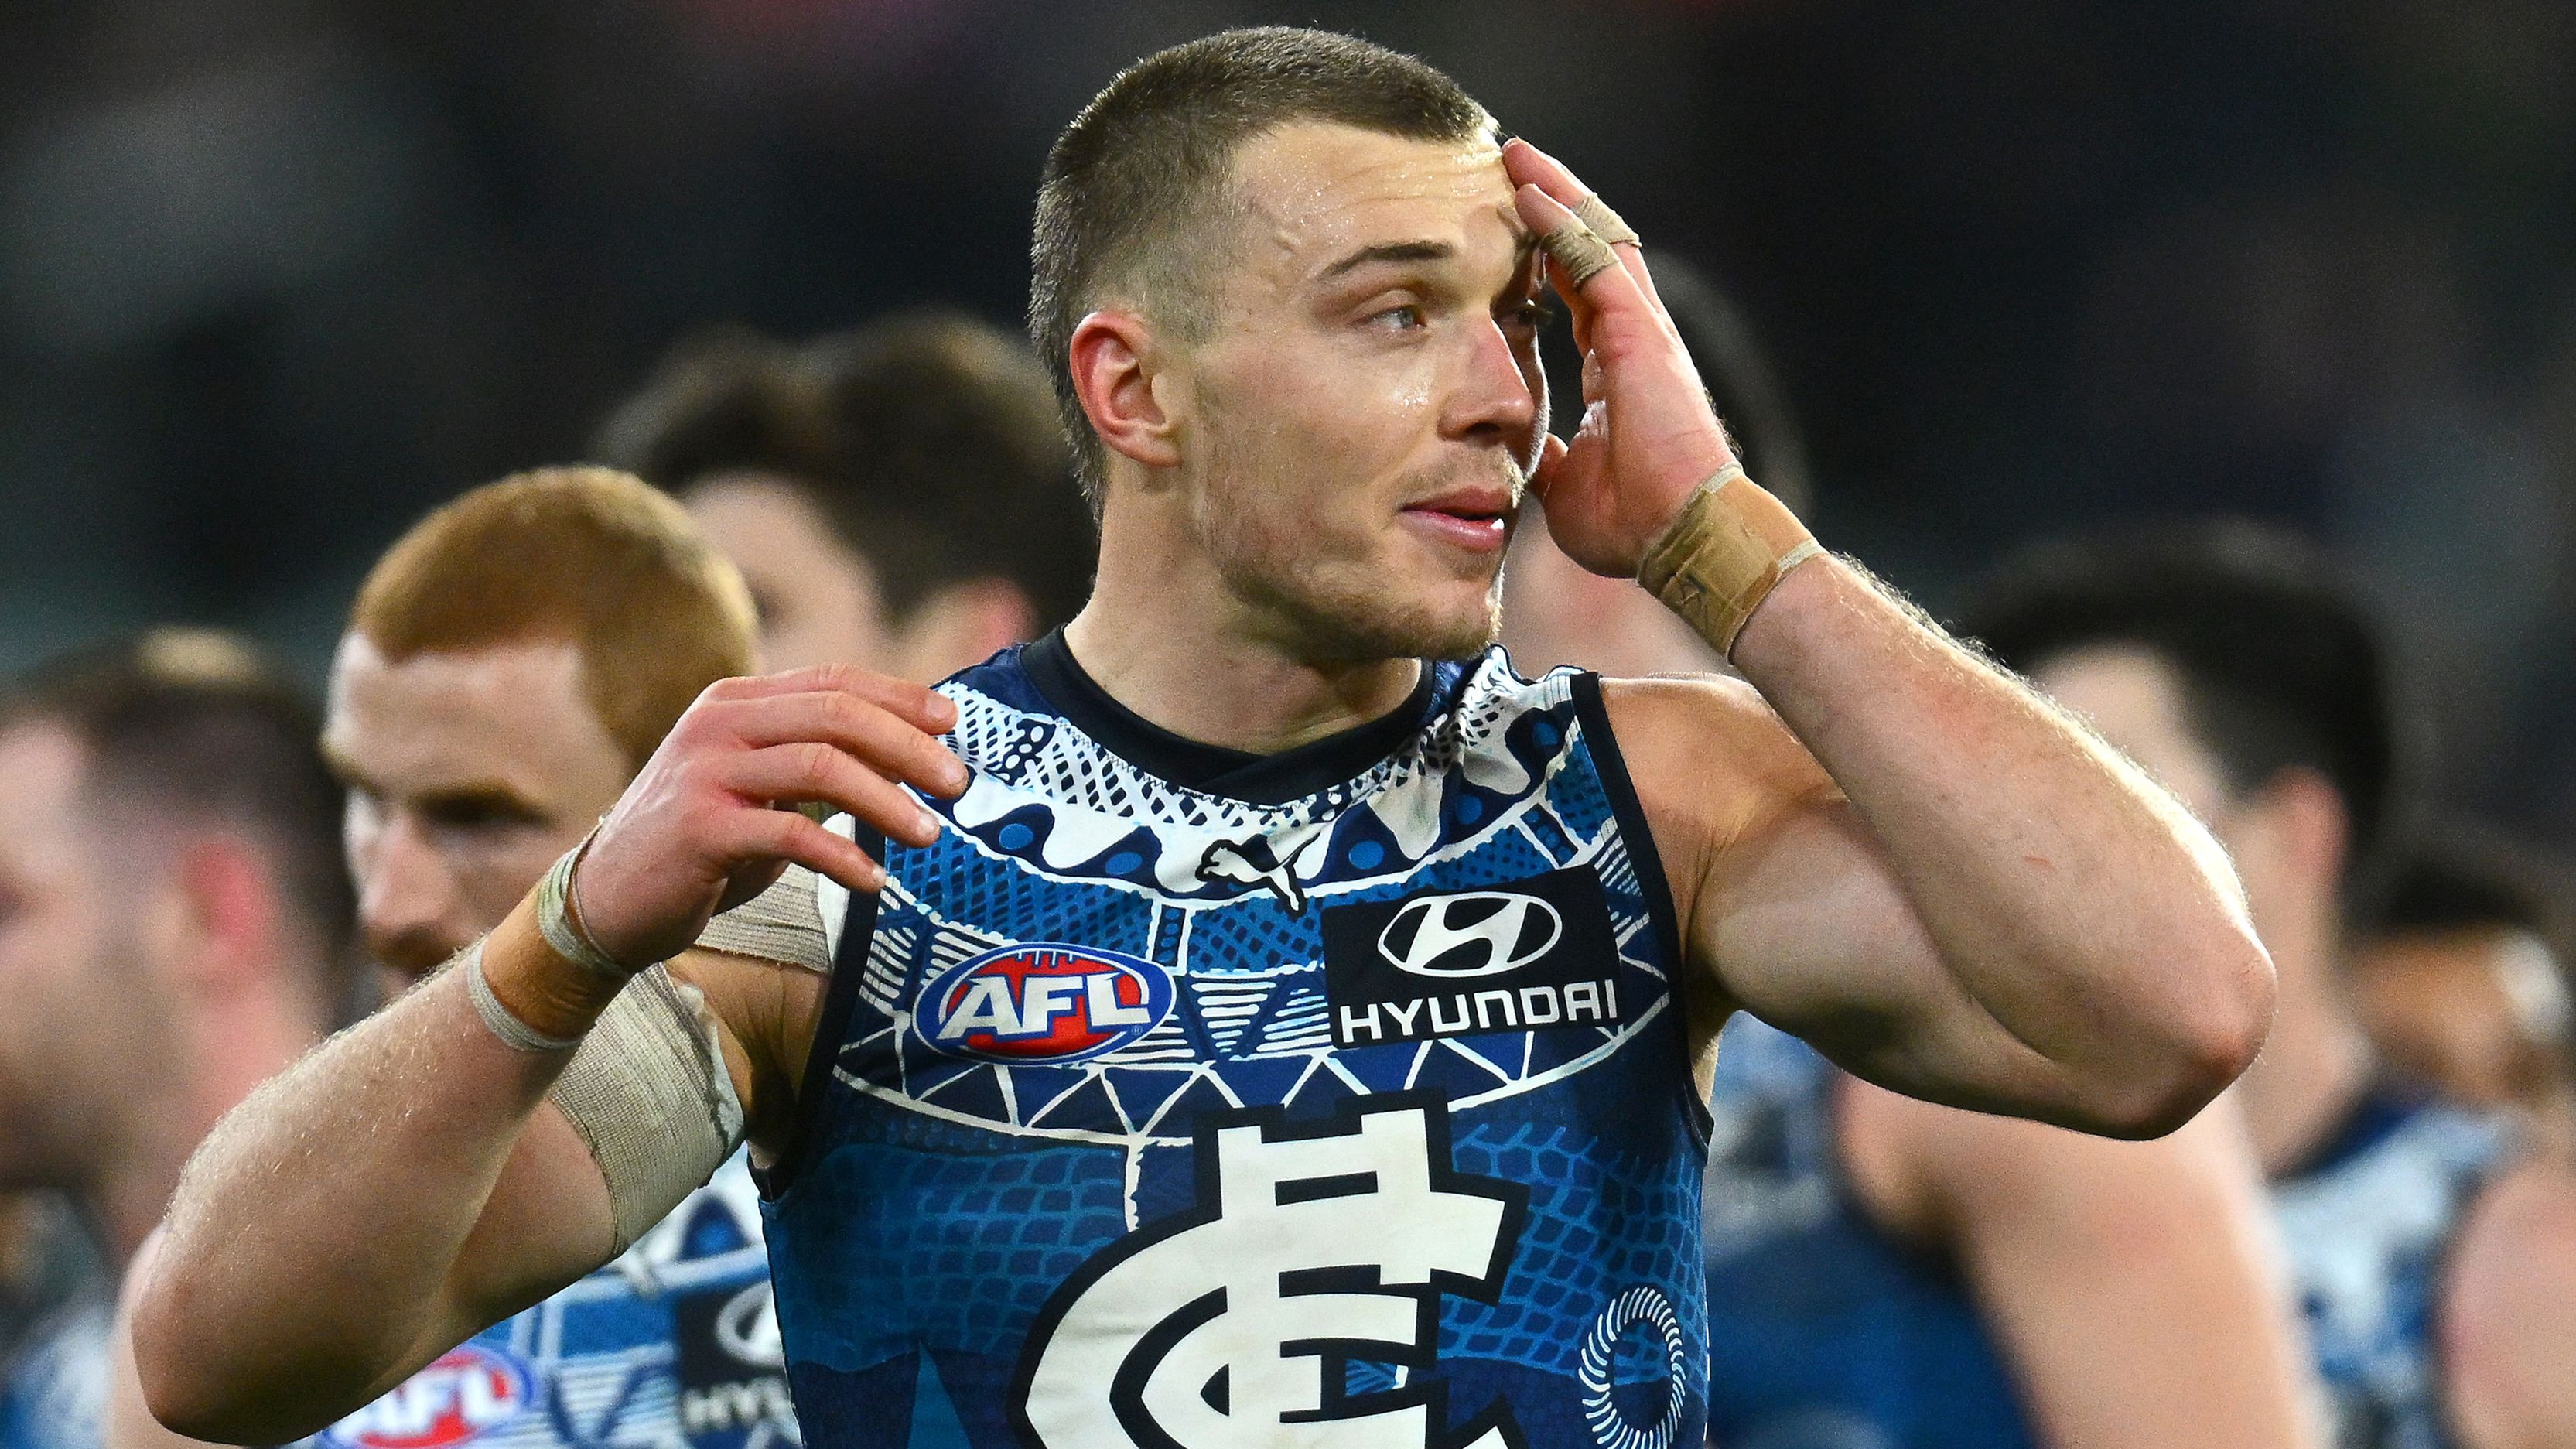 Carlton captain Patrick Cripps fires back at 'factually incorrect' story about Sydney trip